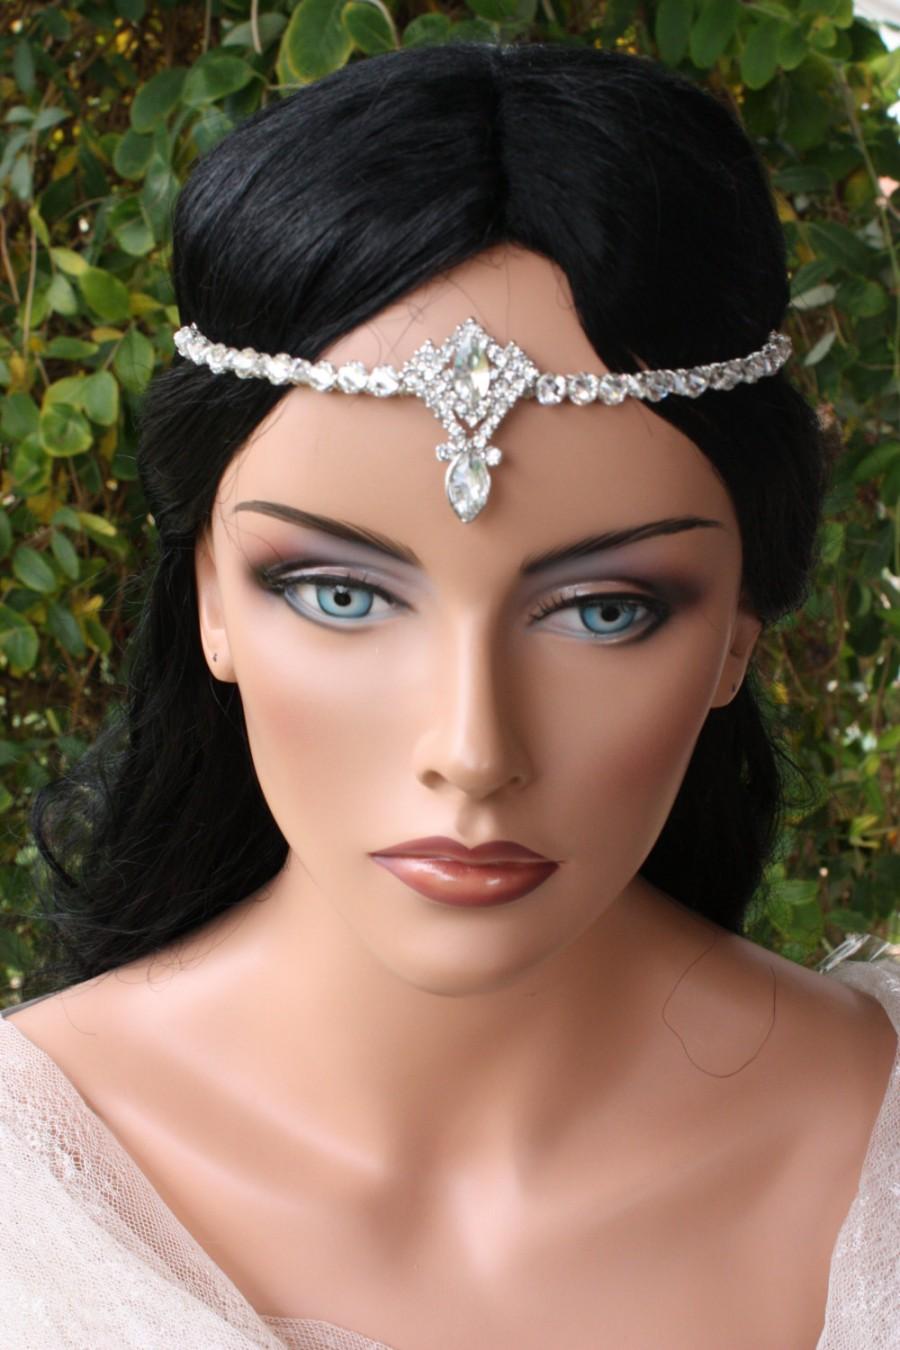 Hochzeit - Gorgeous Bridal Head Circlet  Head Piece with Rhinestones and Crystals, Large Centerpiece, Headband, Forehead, Ornate, Indian Style